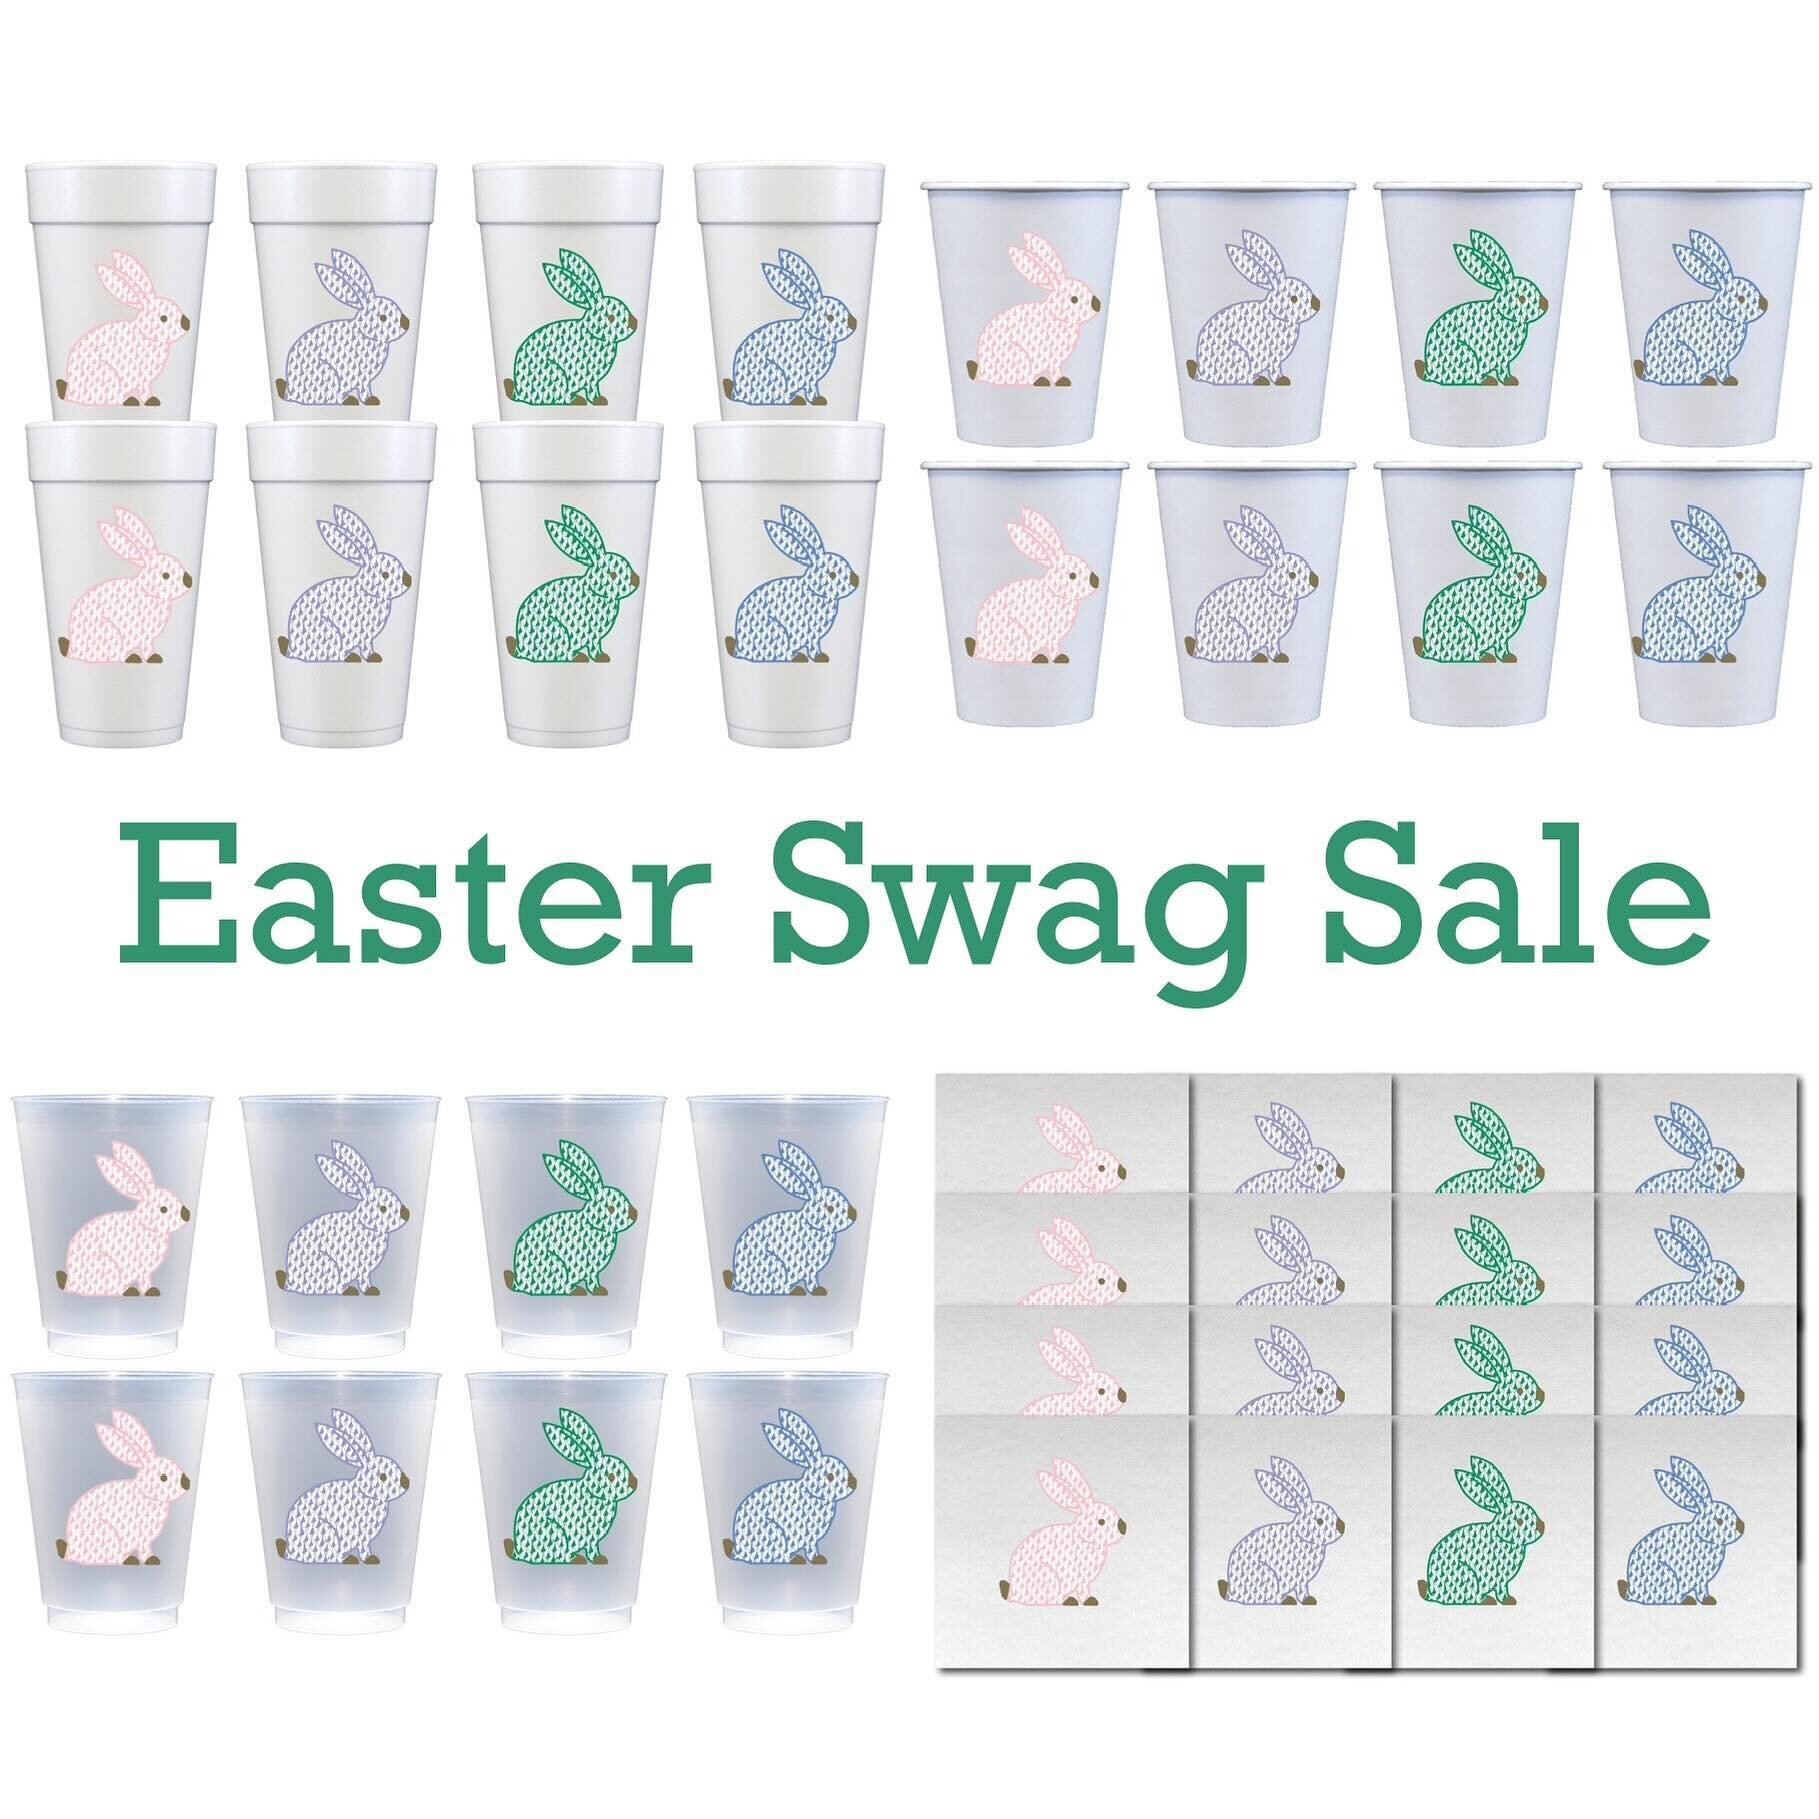 #itsworthnoting all of our Easter swag is on sale!  Head on over to our website to purchase!  #easterswag #eastercups #easternapkins